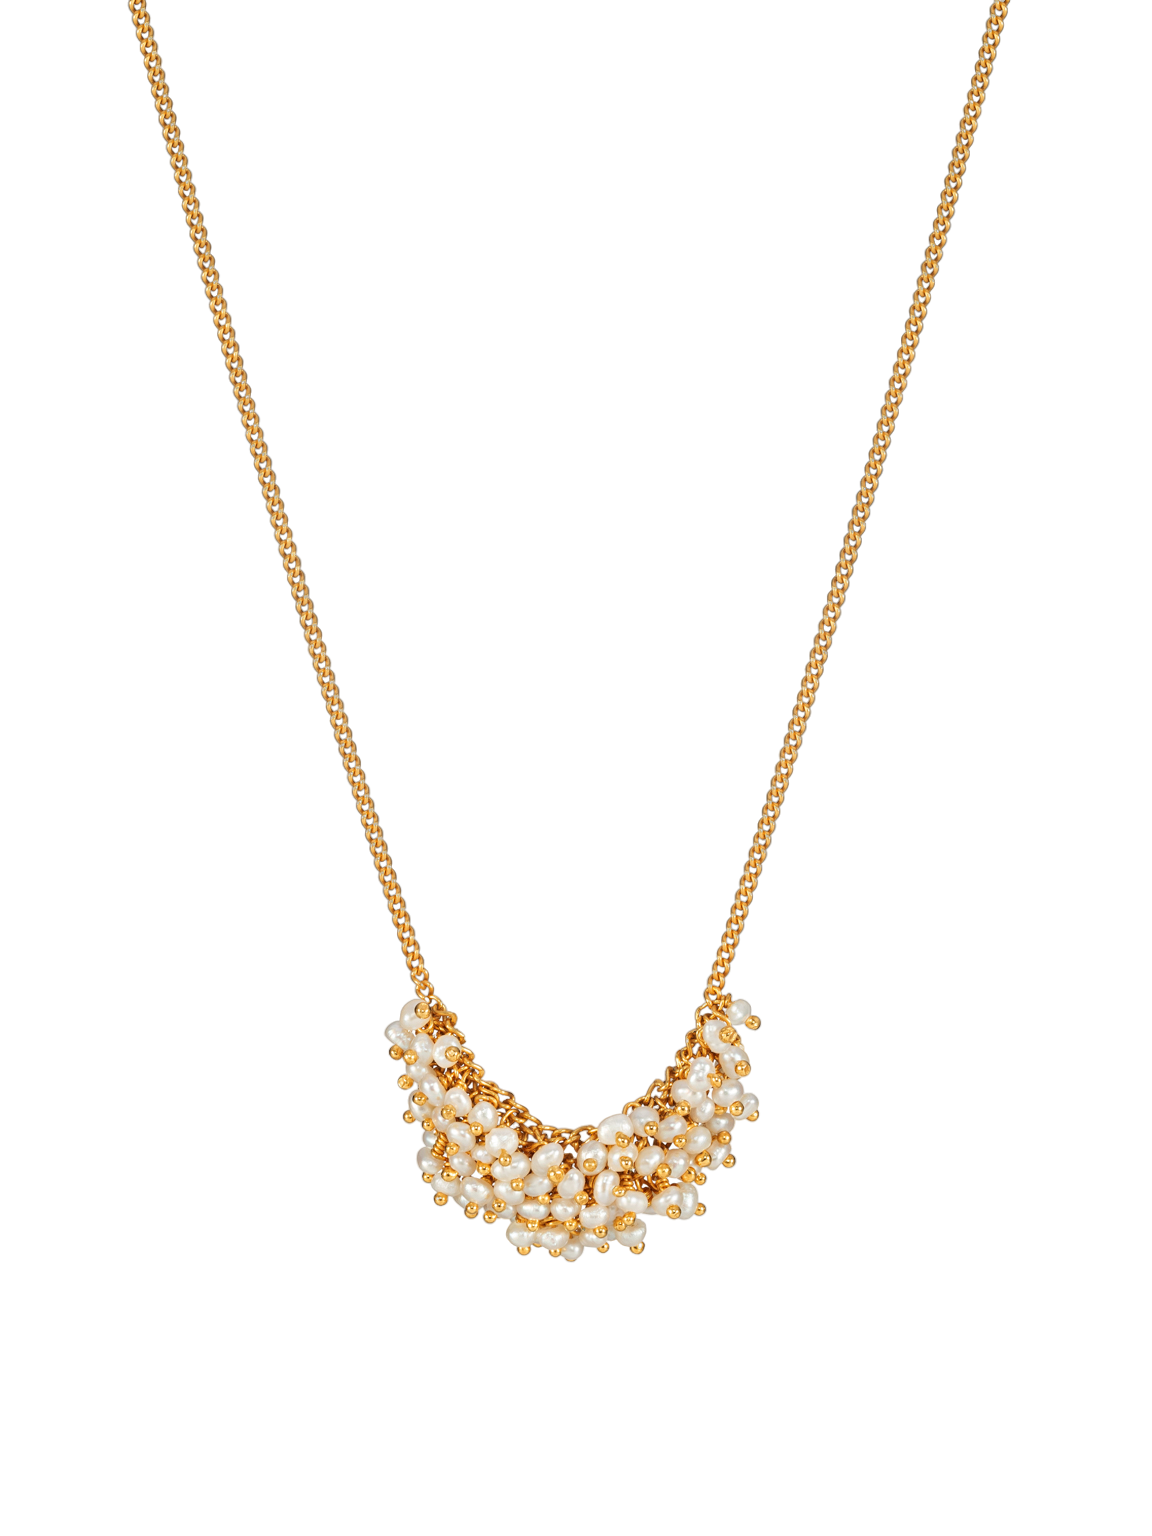 Crescent necklace in pearl